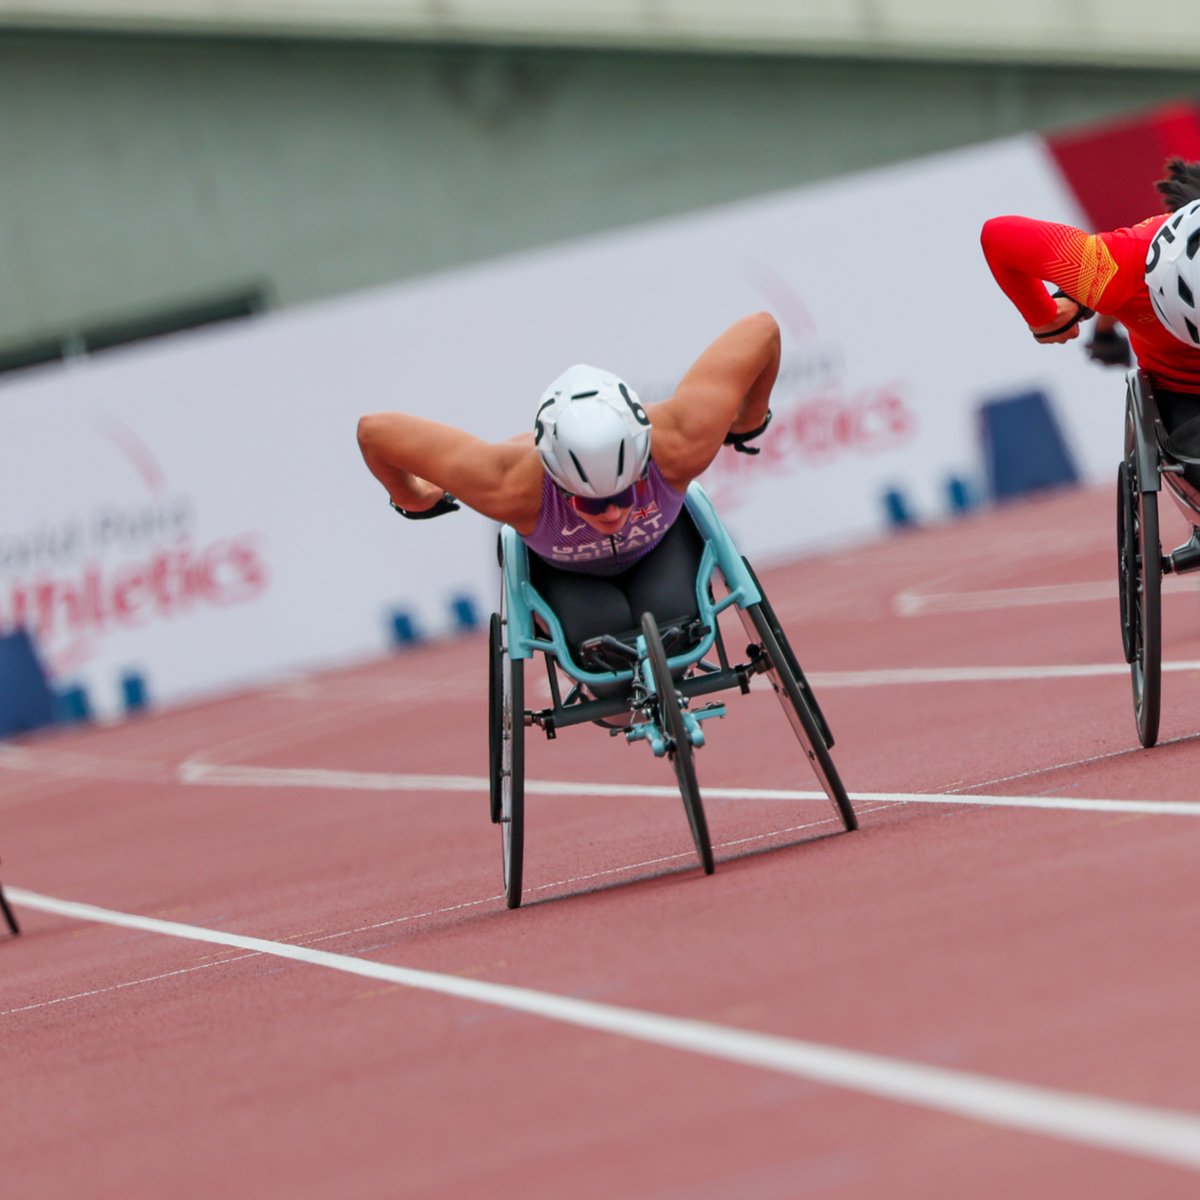 In a fierce T54 400m final, Mel Woods finishes fourth with 55.33 👏 Fantastic racing. #ParaAthletics | @kobe2022wpac